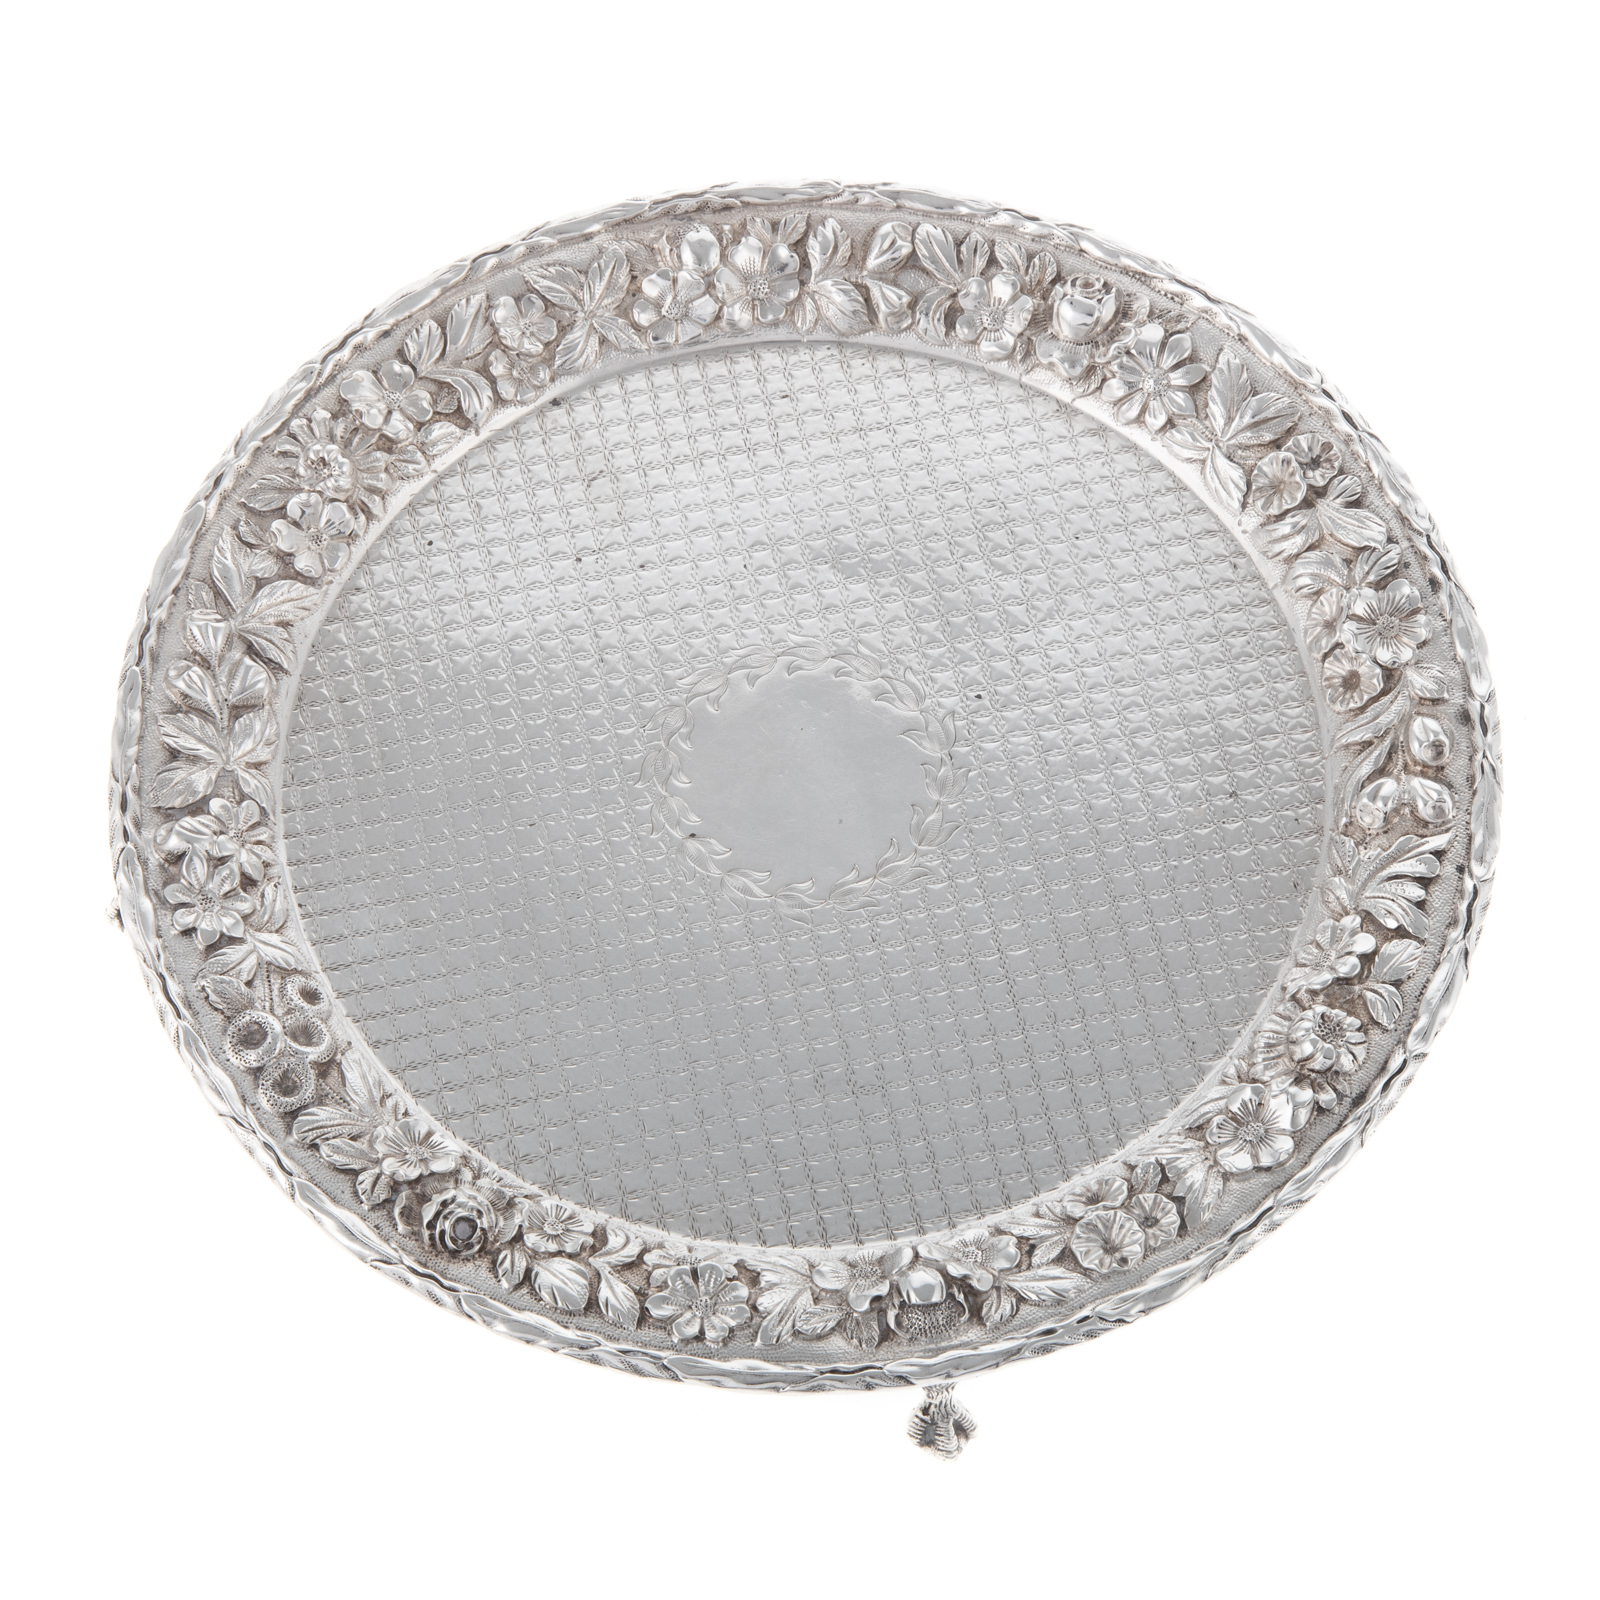 S KIRK & SON CO STERLING SALVER